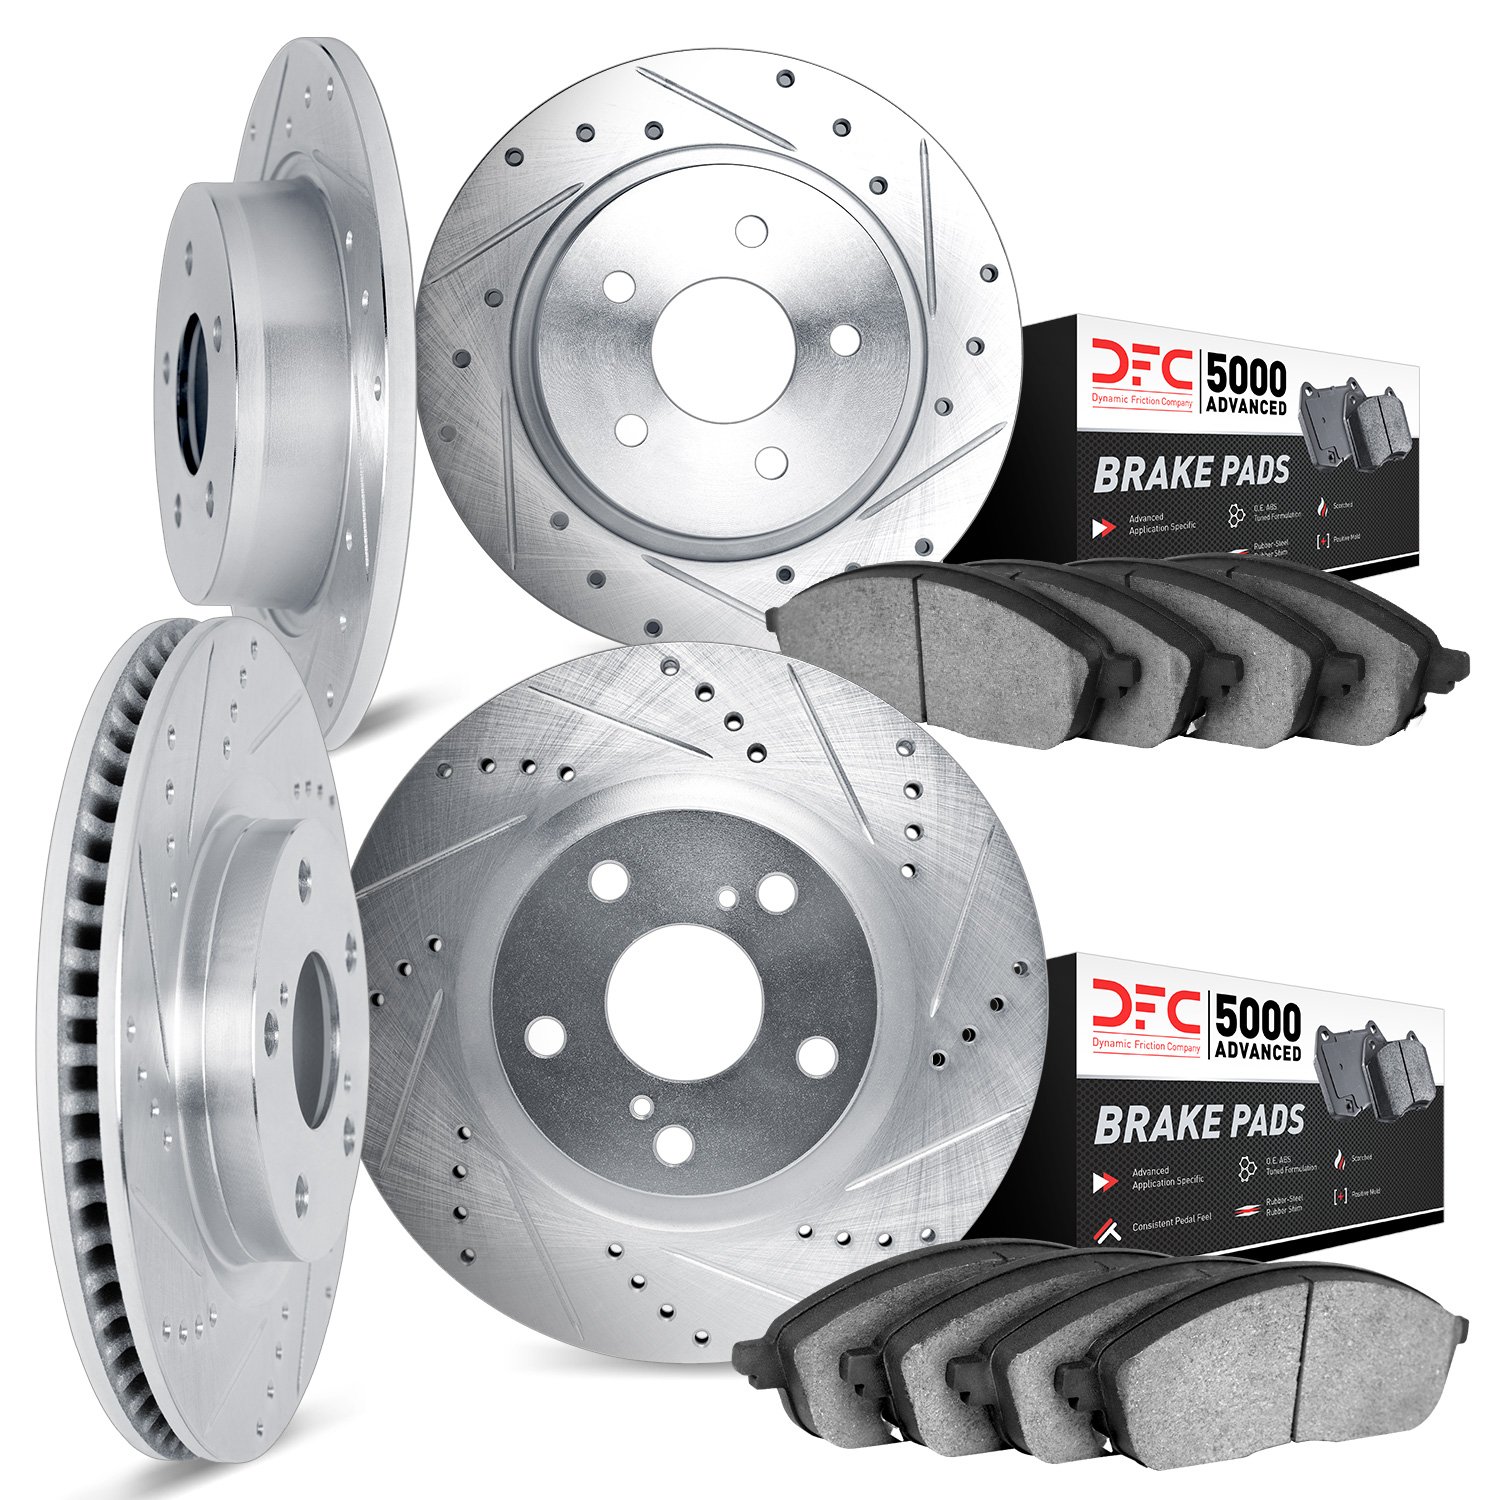 7504-54398 Drilled/Slotted Brake Rotors w/5000 Advanced Brake Pads Kit [Silver], 2017-2020 Ford/Lincoln/Mercury/Mazda, Position: